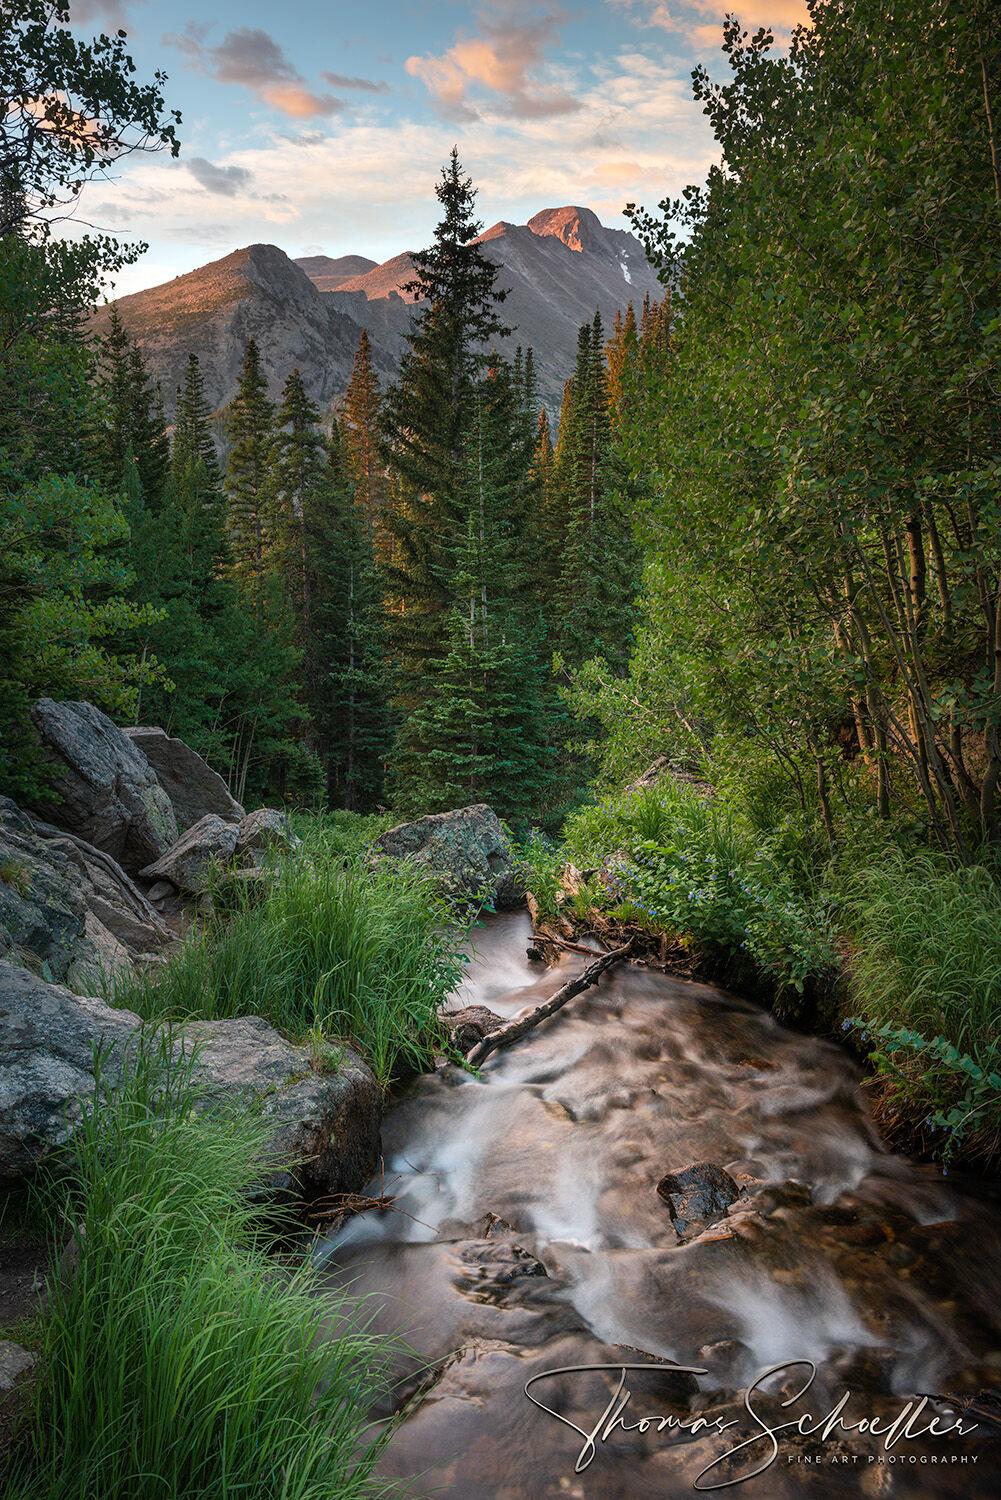 The picturesque Lyndall Creek gently flows towards the towering presence of Long's peak as it makes its way through the Rocky Mountain National Park forest